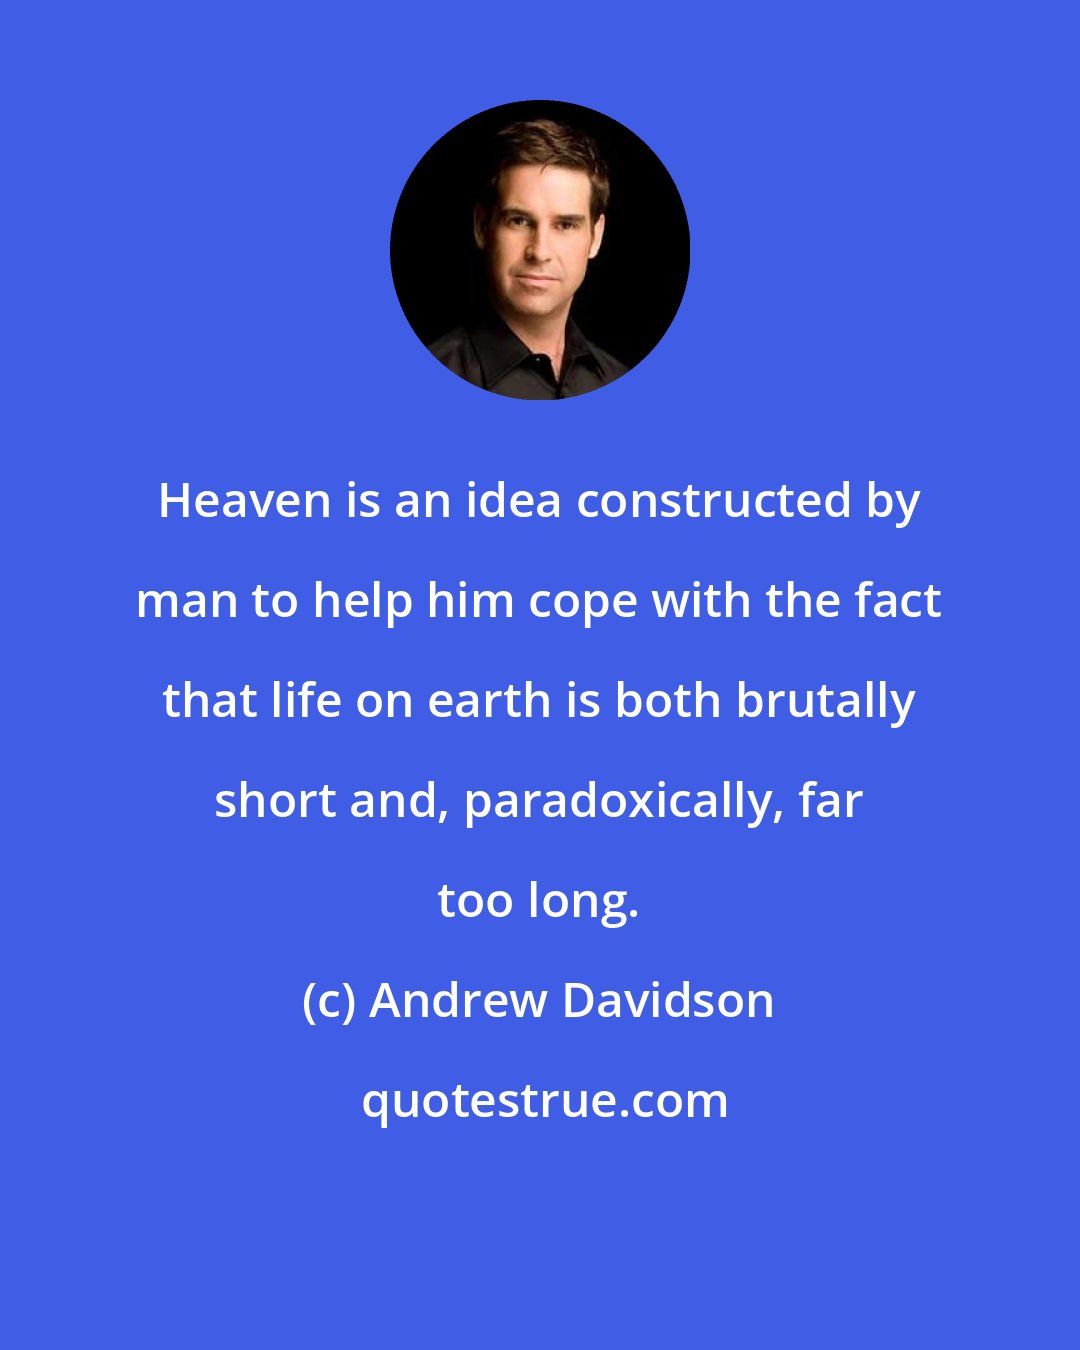 Andrew Davidson: Heaven is an idea constructed by man to help him cope with the fact that life on earth is both brutally short and, paradoxically, far too long.